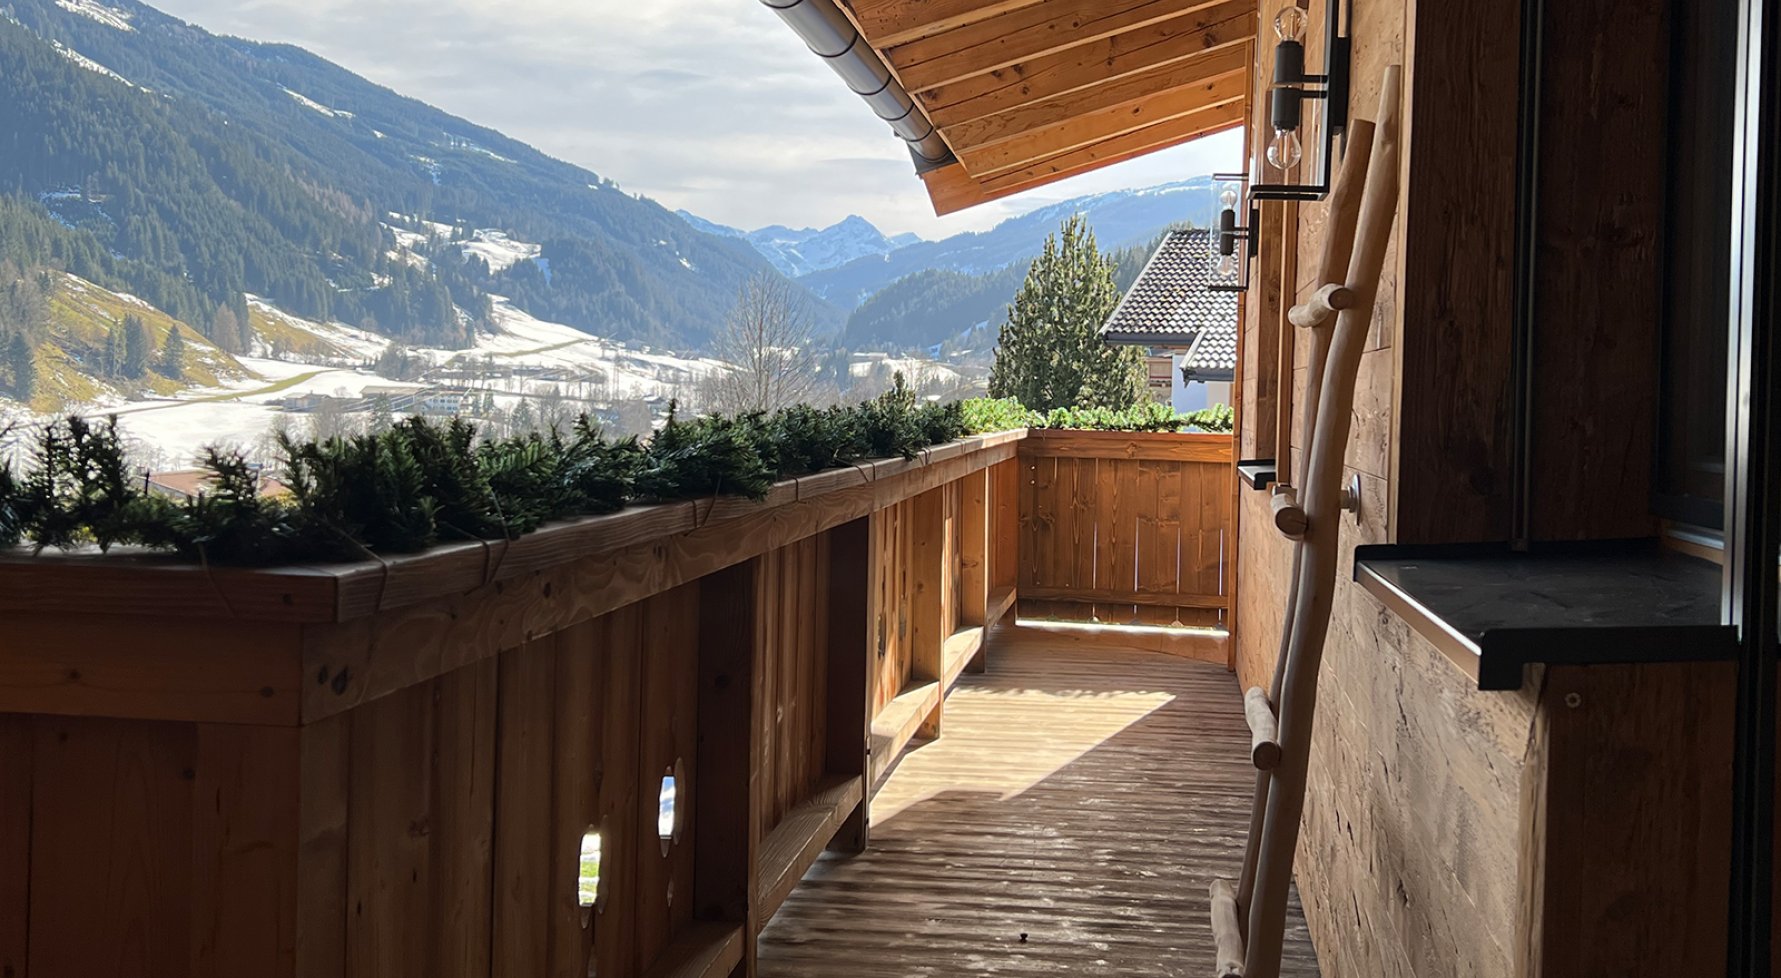 Property in 6373 Kitzbühel - Jochberg: MODERN LIVING MEETS TRADITION! Terrace apartment in direct ski lift proximity - picture 1